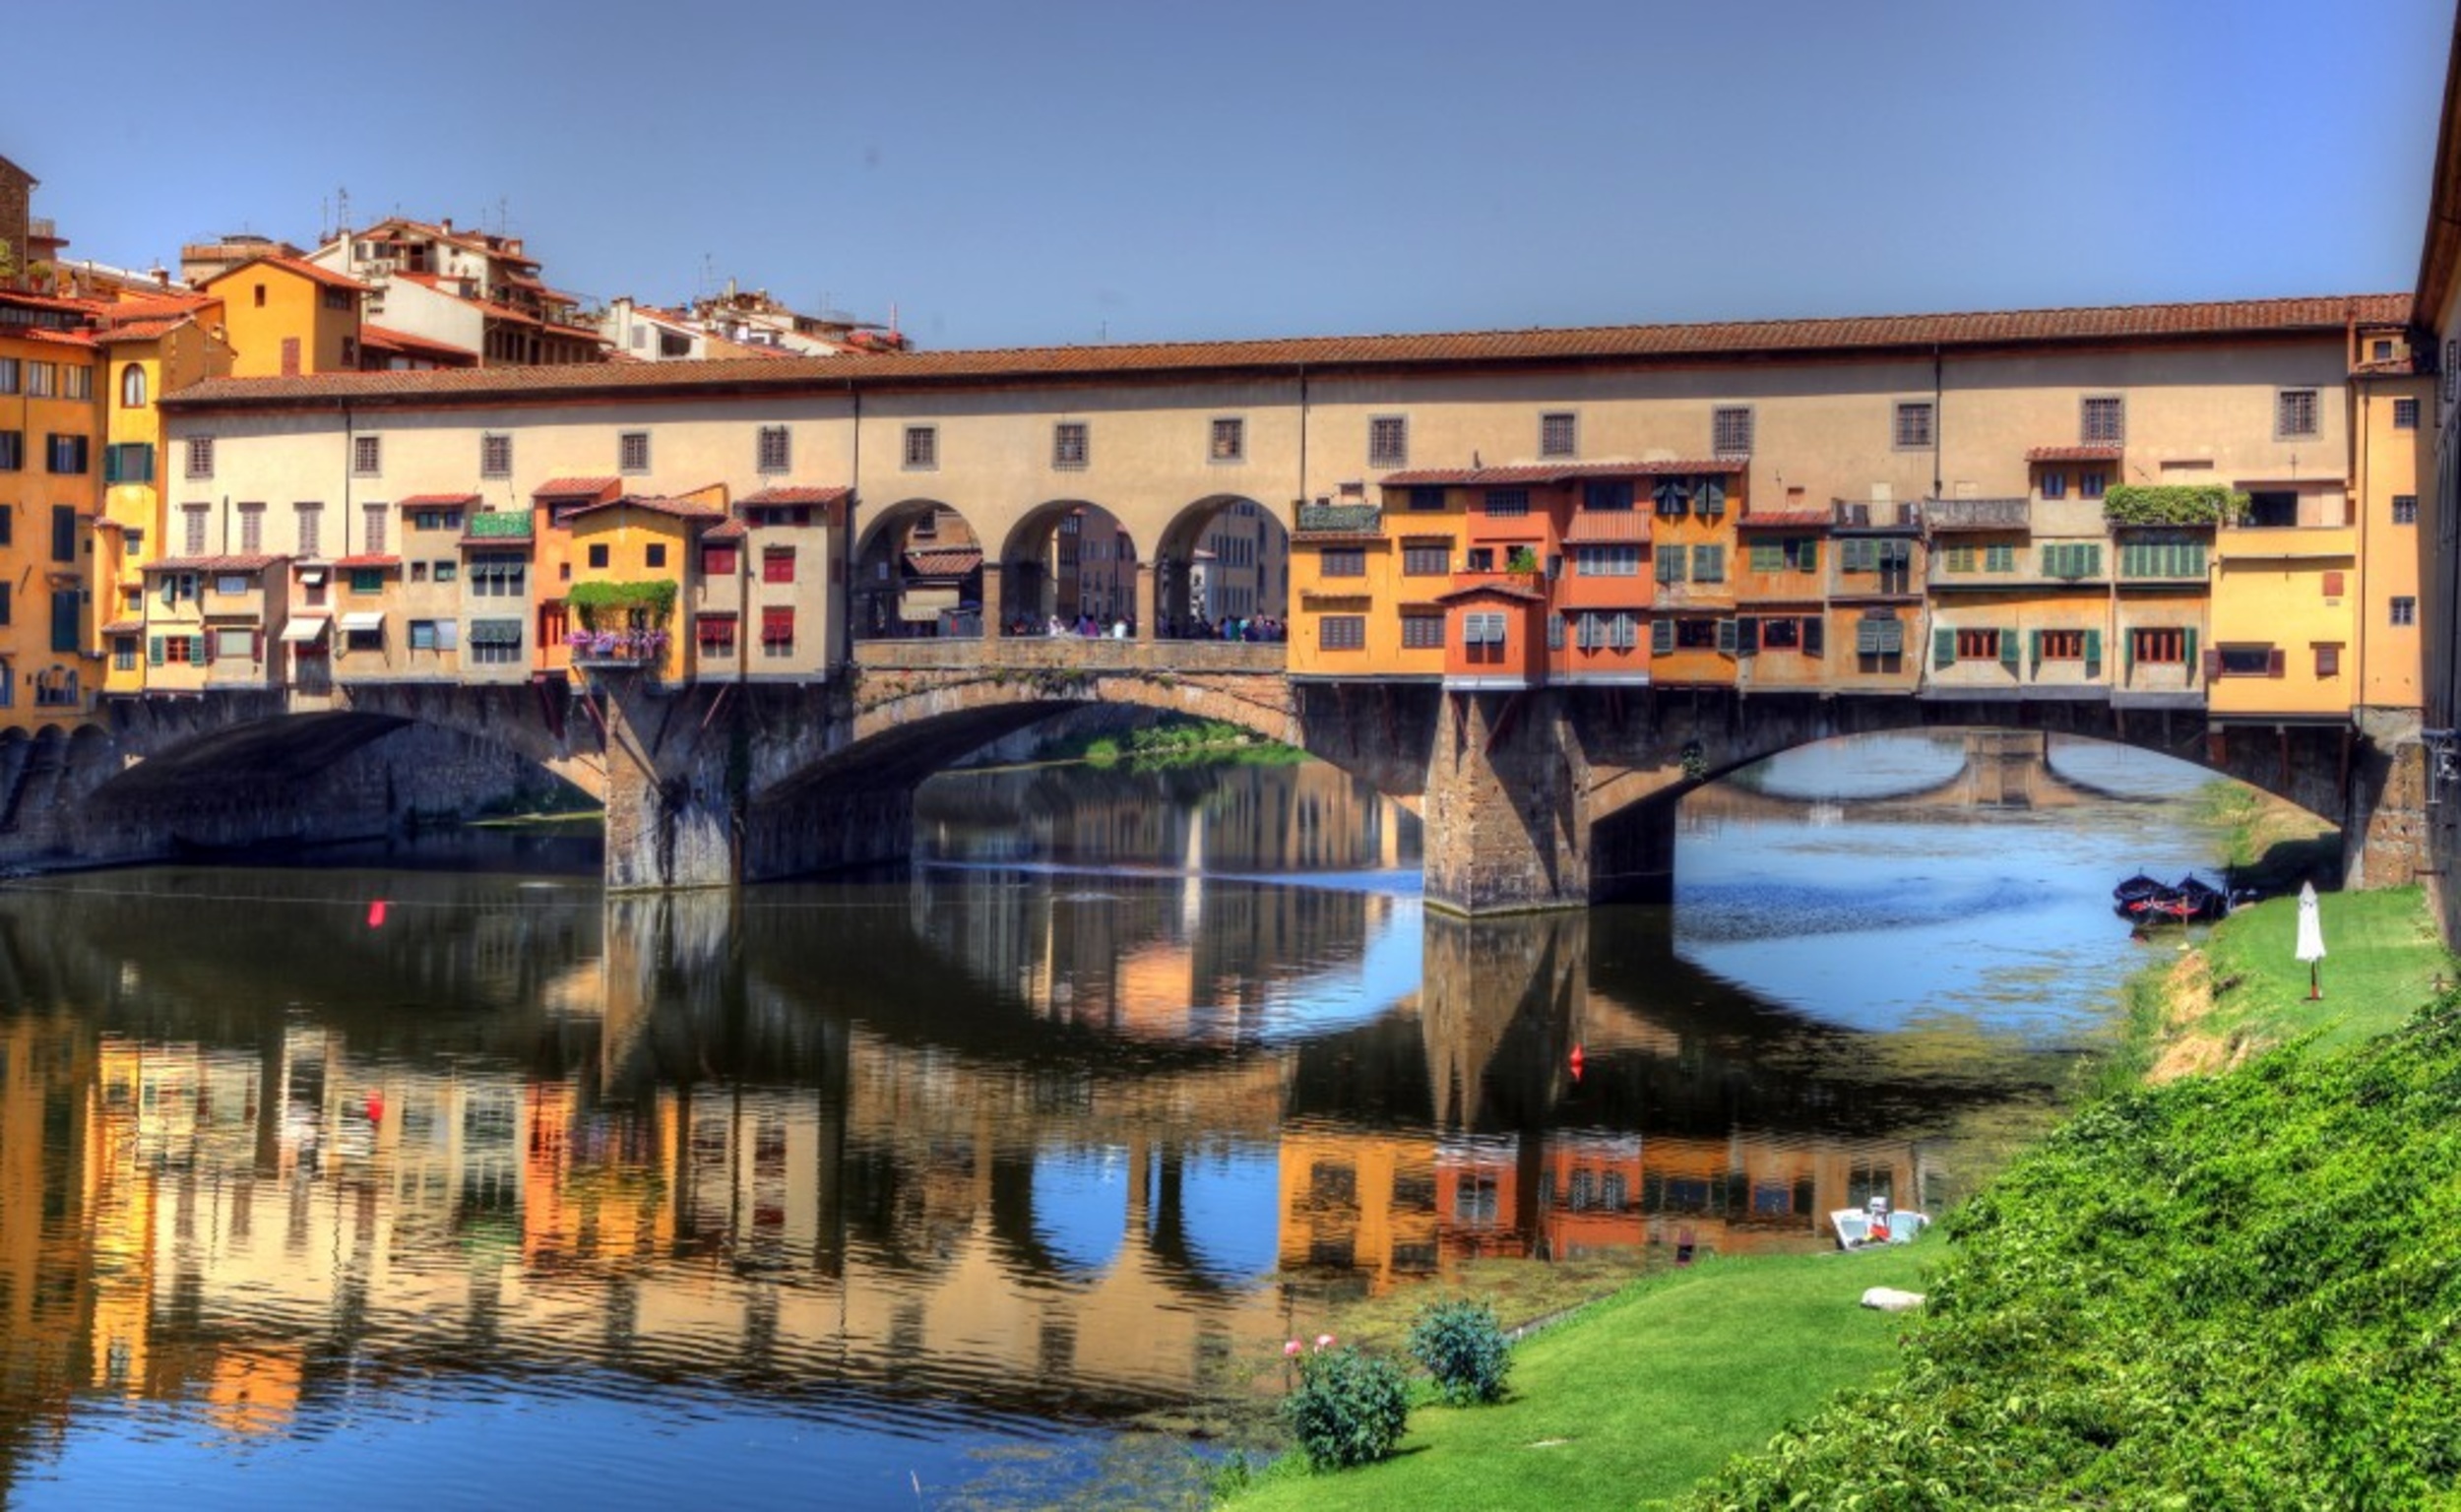 <p>The Ponte Vecchio is emblematic of the city of Florence. Looming over the Arno River with arched shoulders, this medieval bridge is considered one of the most famous sights in Europe, one that's stood the test of time. Like the rest of Florence, it somehow hasn't aged a day since it was built. </p><p>You may also like: <a href='https://www.yardbarker.com/lifestyle/articles/20_delicious_twists_on_classic_lasagna_103123/s1__24411058'>20 delicious twists on classic lasagna</a></p>